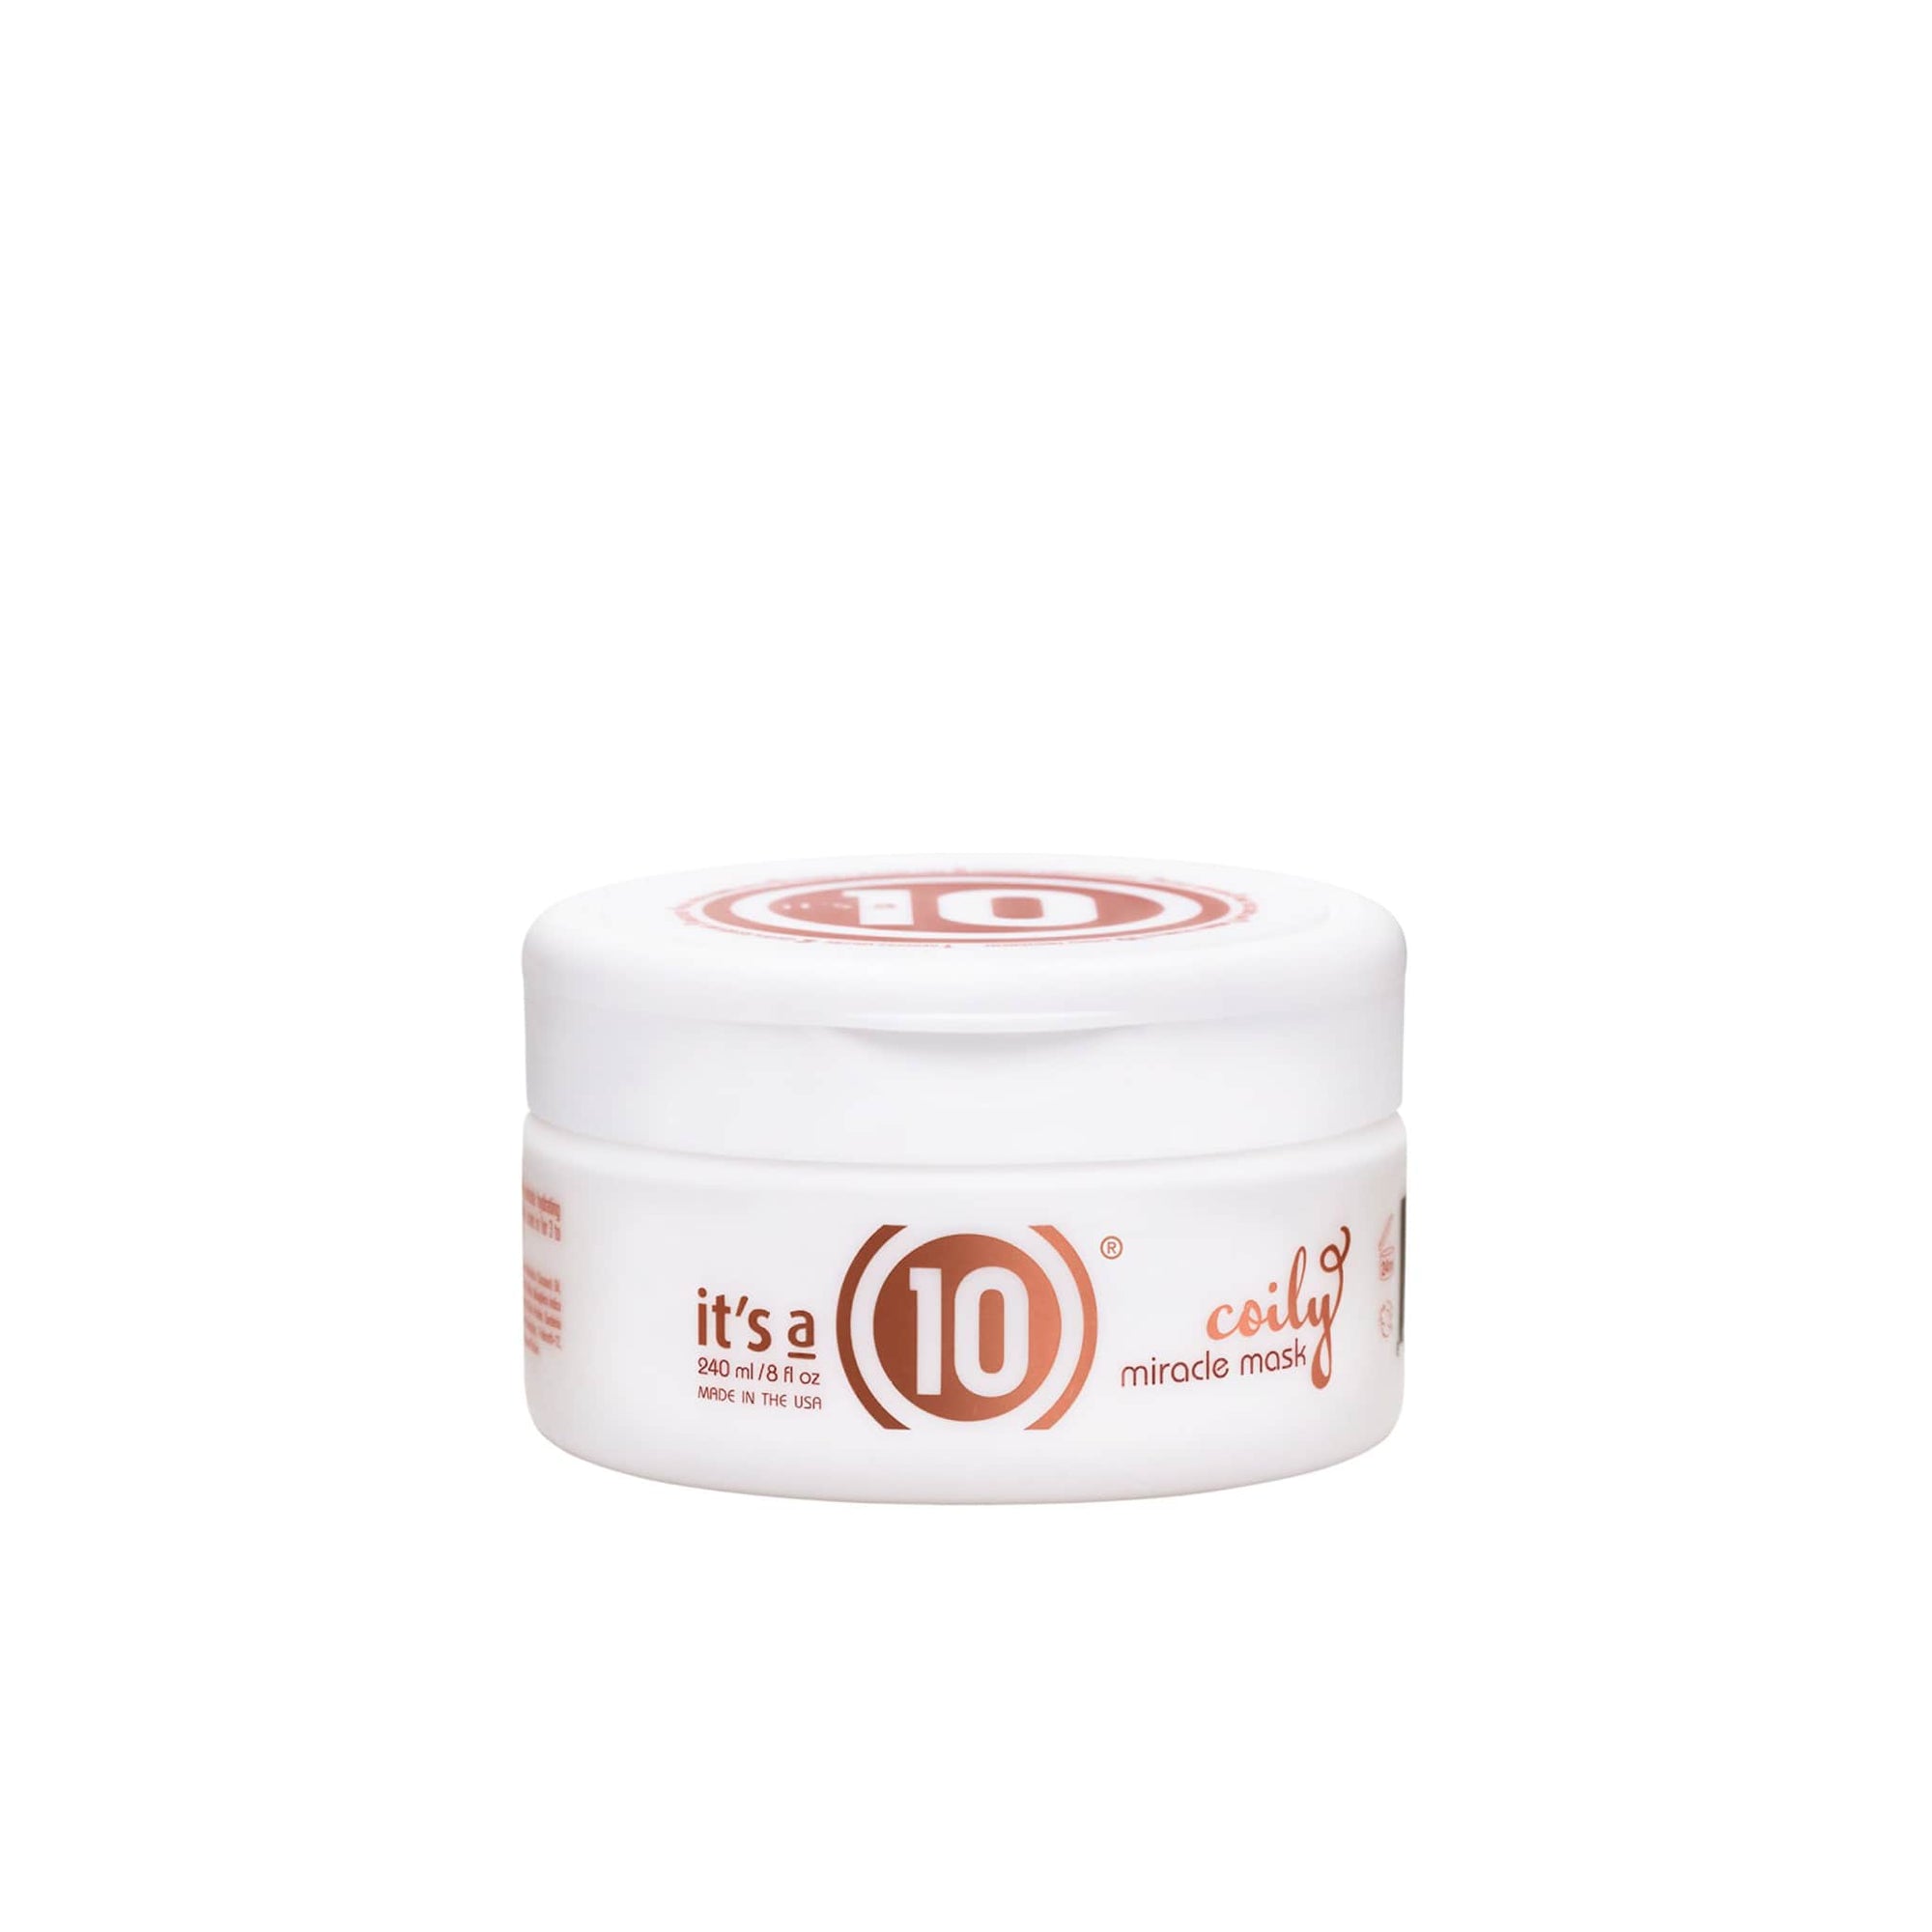 It's a 10 Miracle Coily Hair Mask 240ml - Shop Online | Retail Box